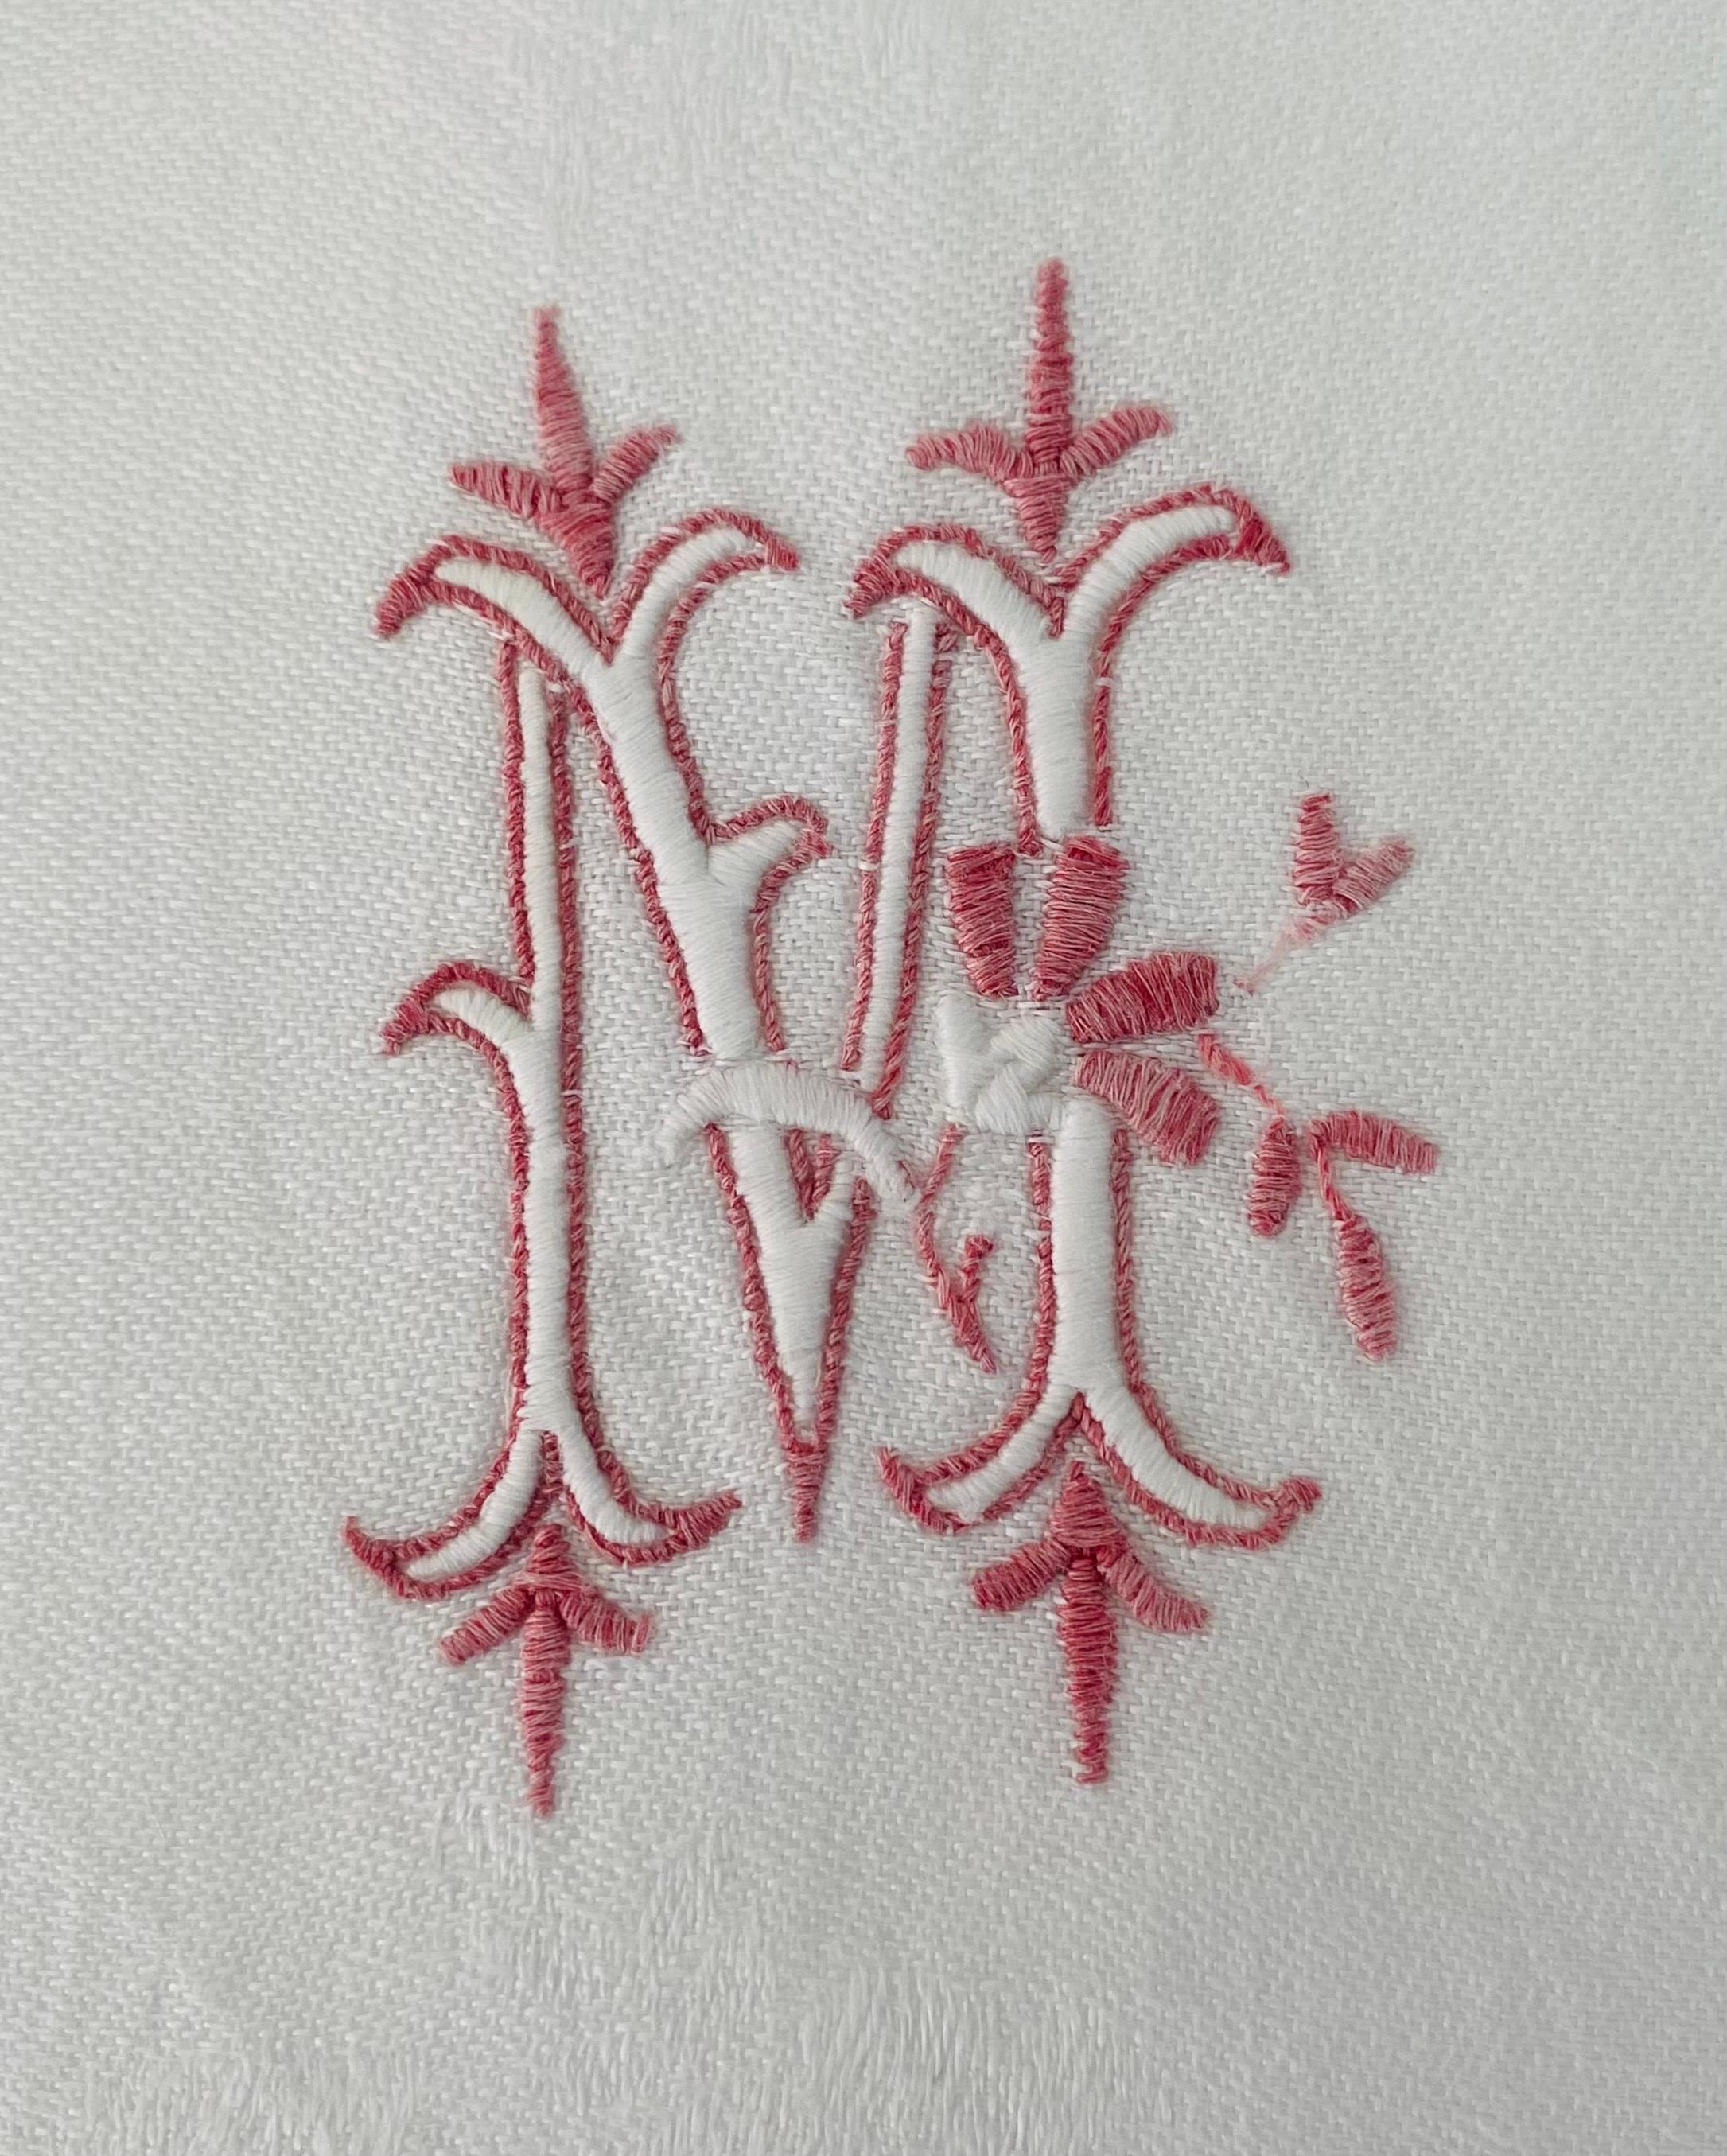  French Set of 6 napkins & tablecloth damask linen embroidered monograms - 1900 For Sale 2